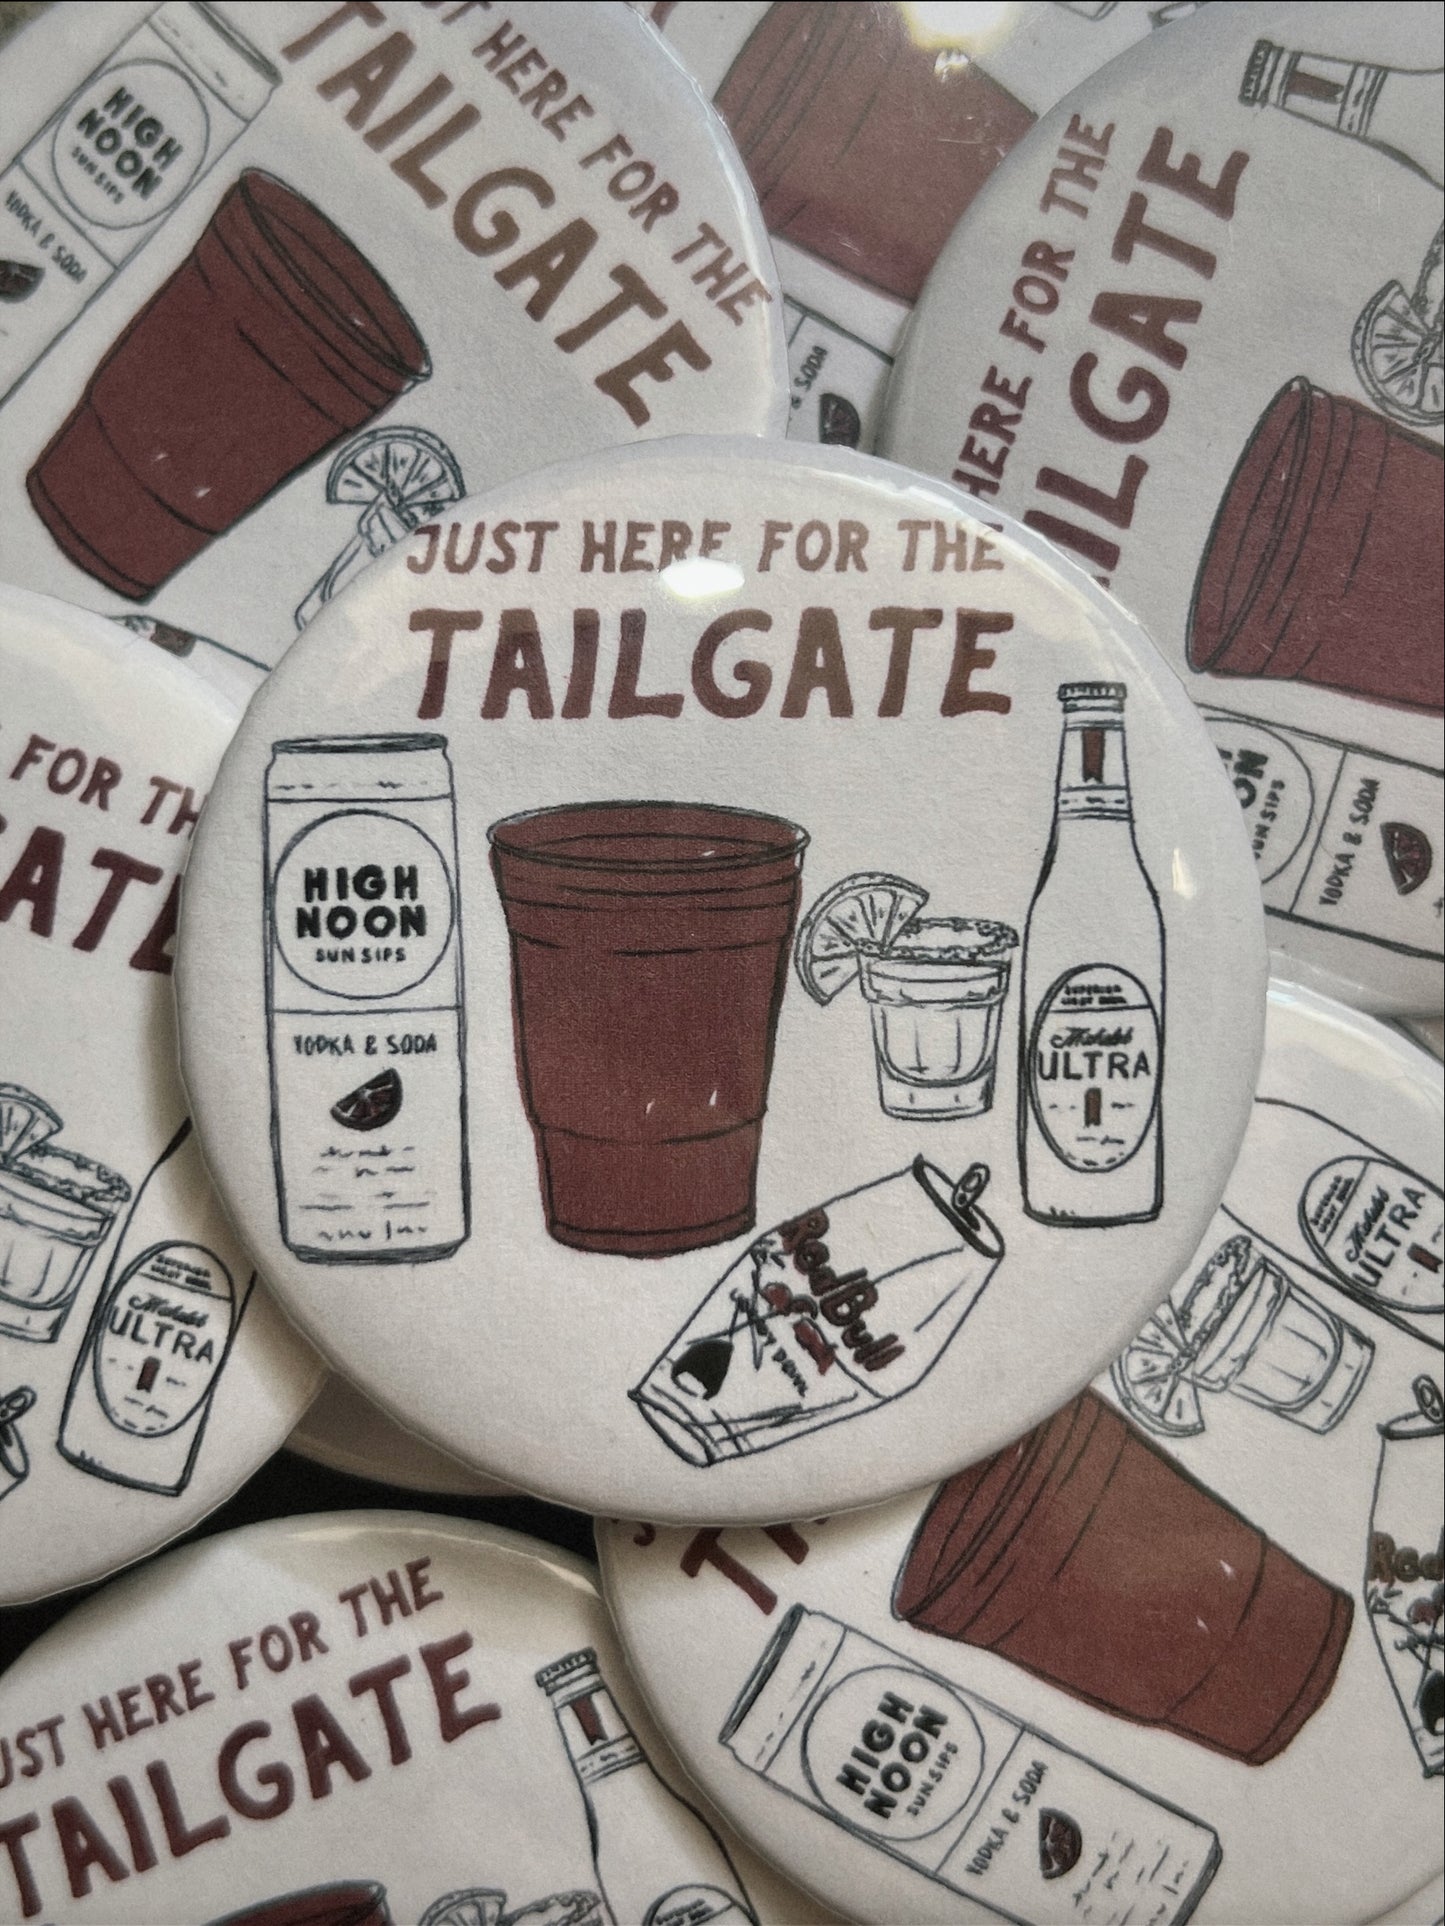 "JUST HERE FOR THE TAILGATE" button